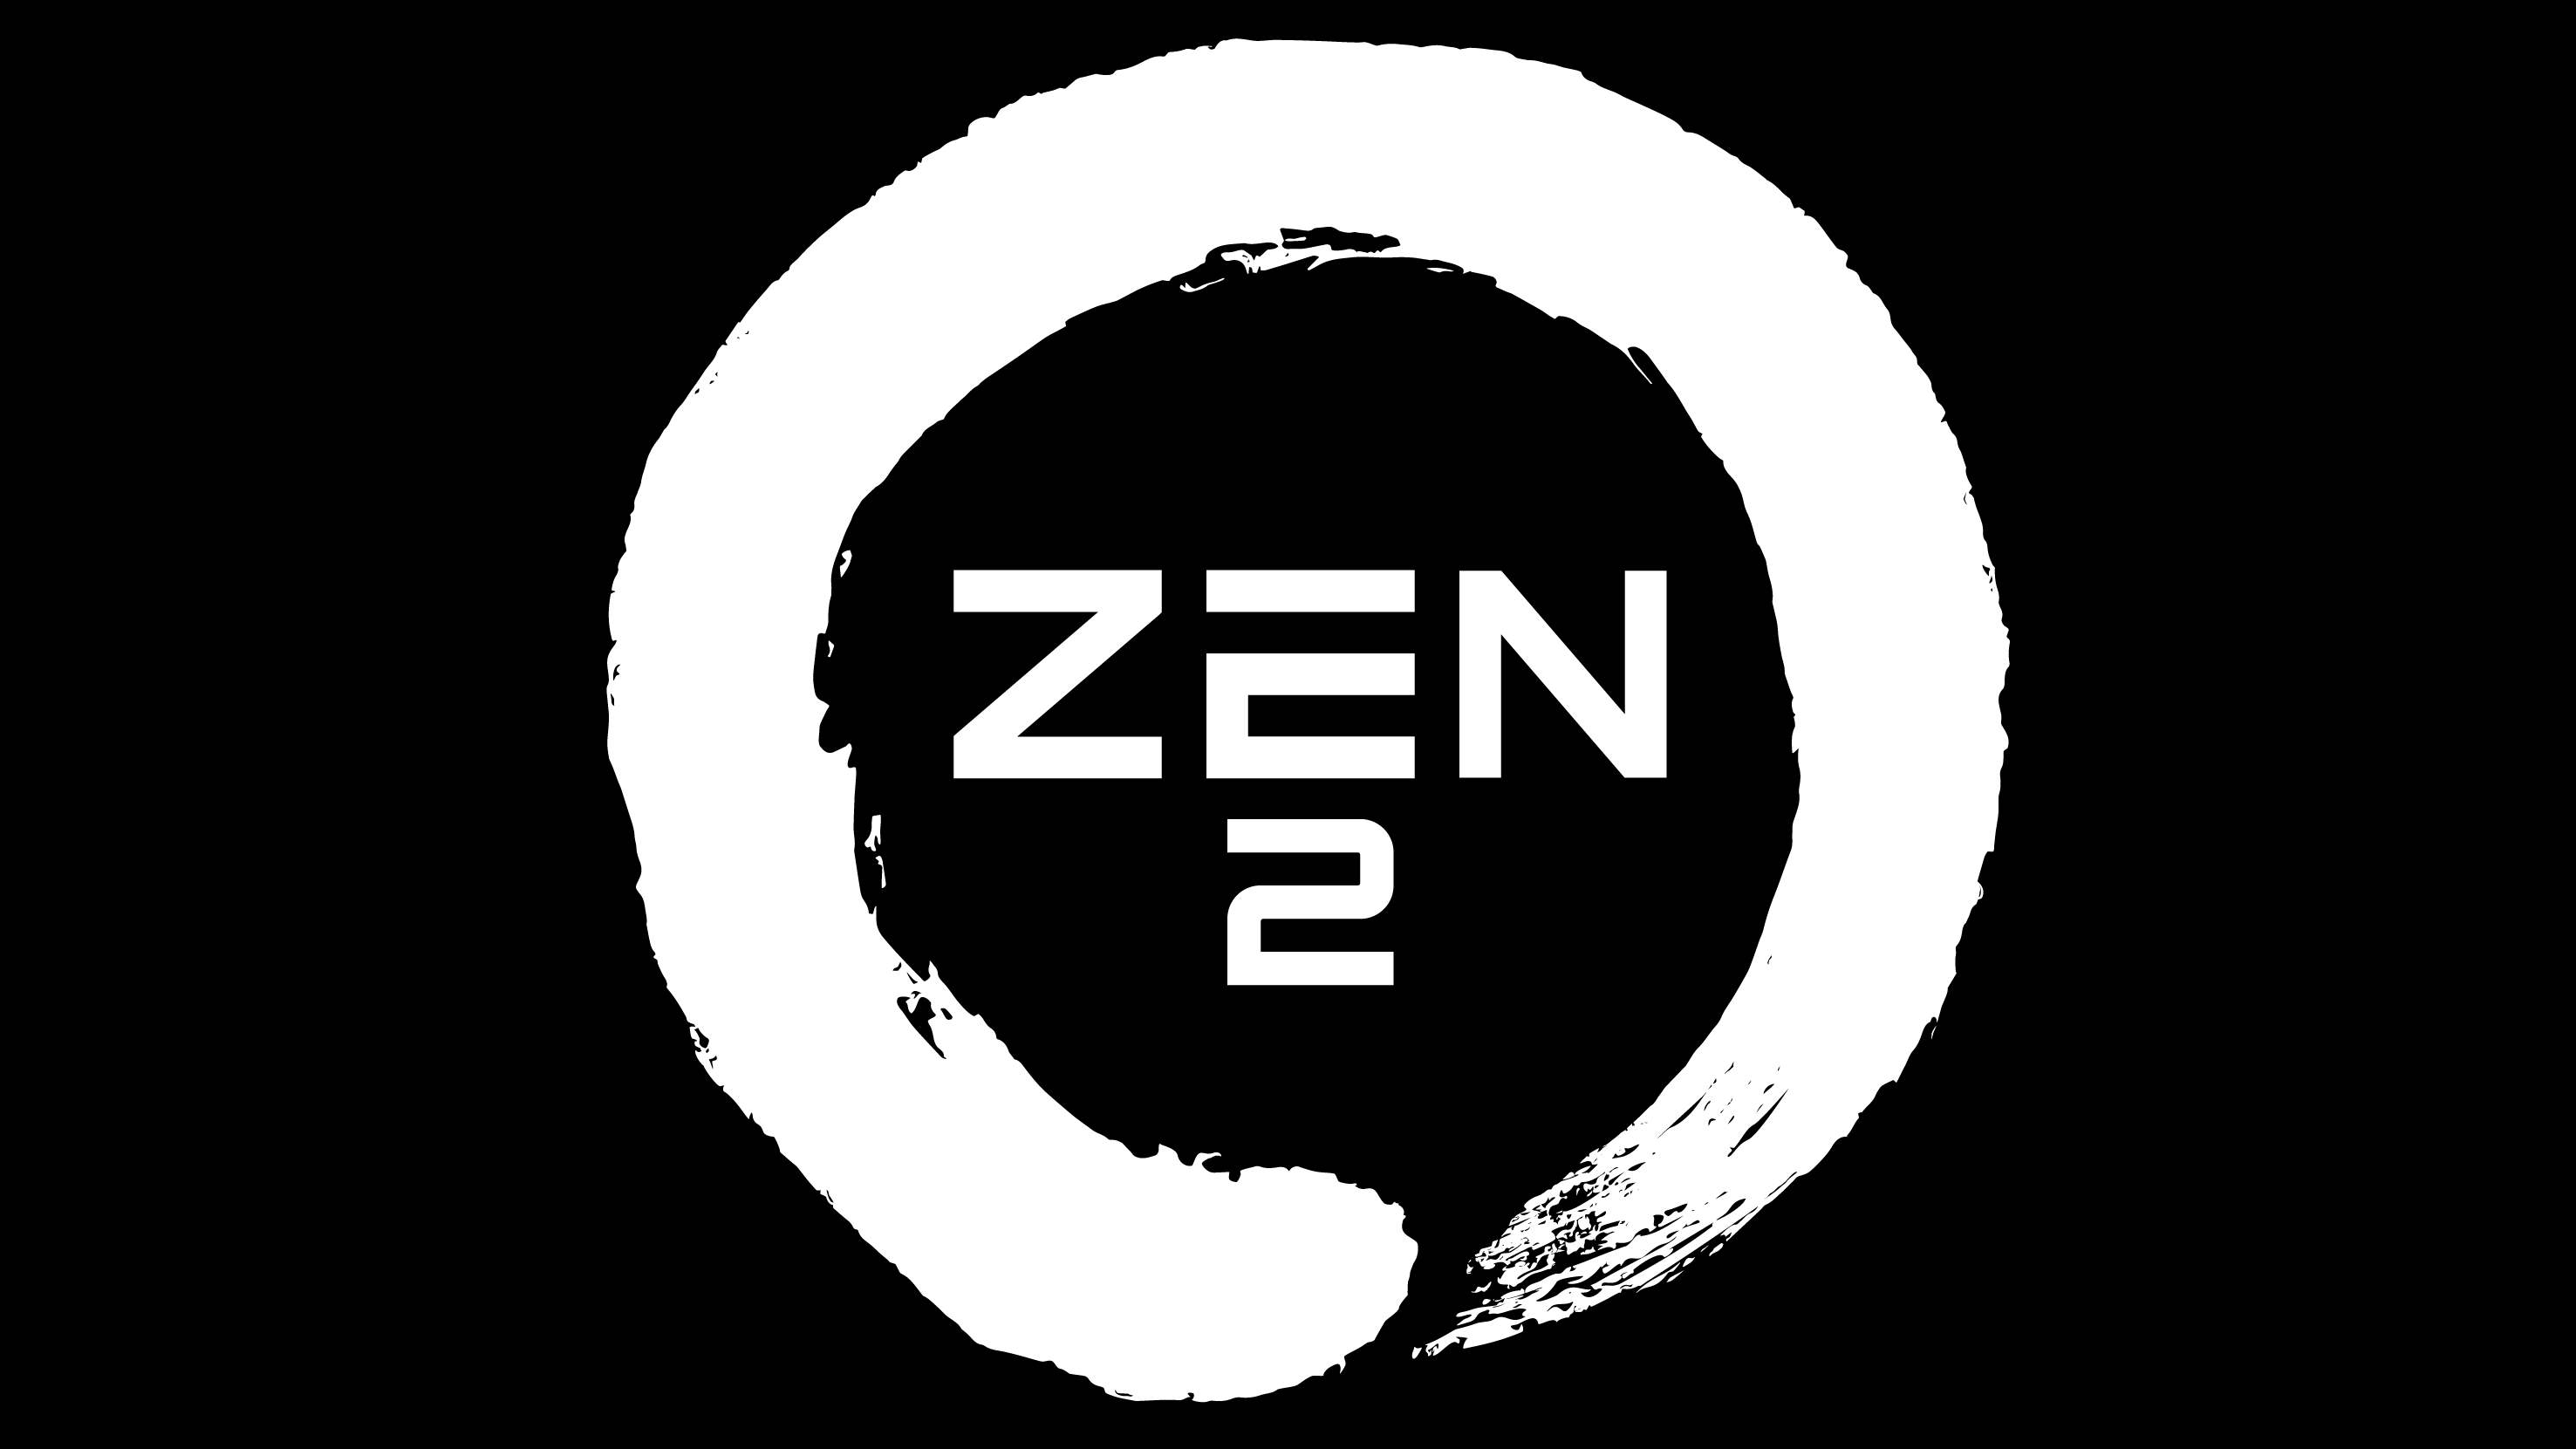 Zen 2 might not offer the IPC increase you expect